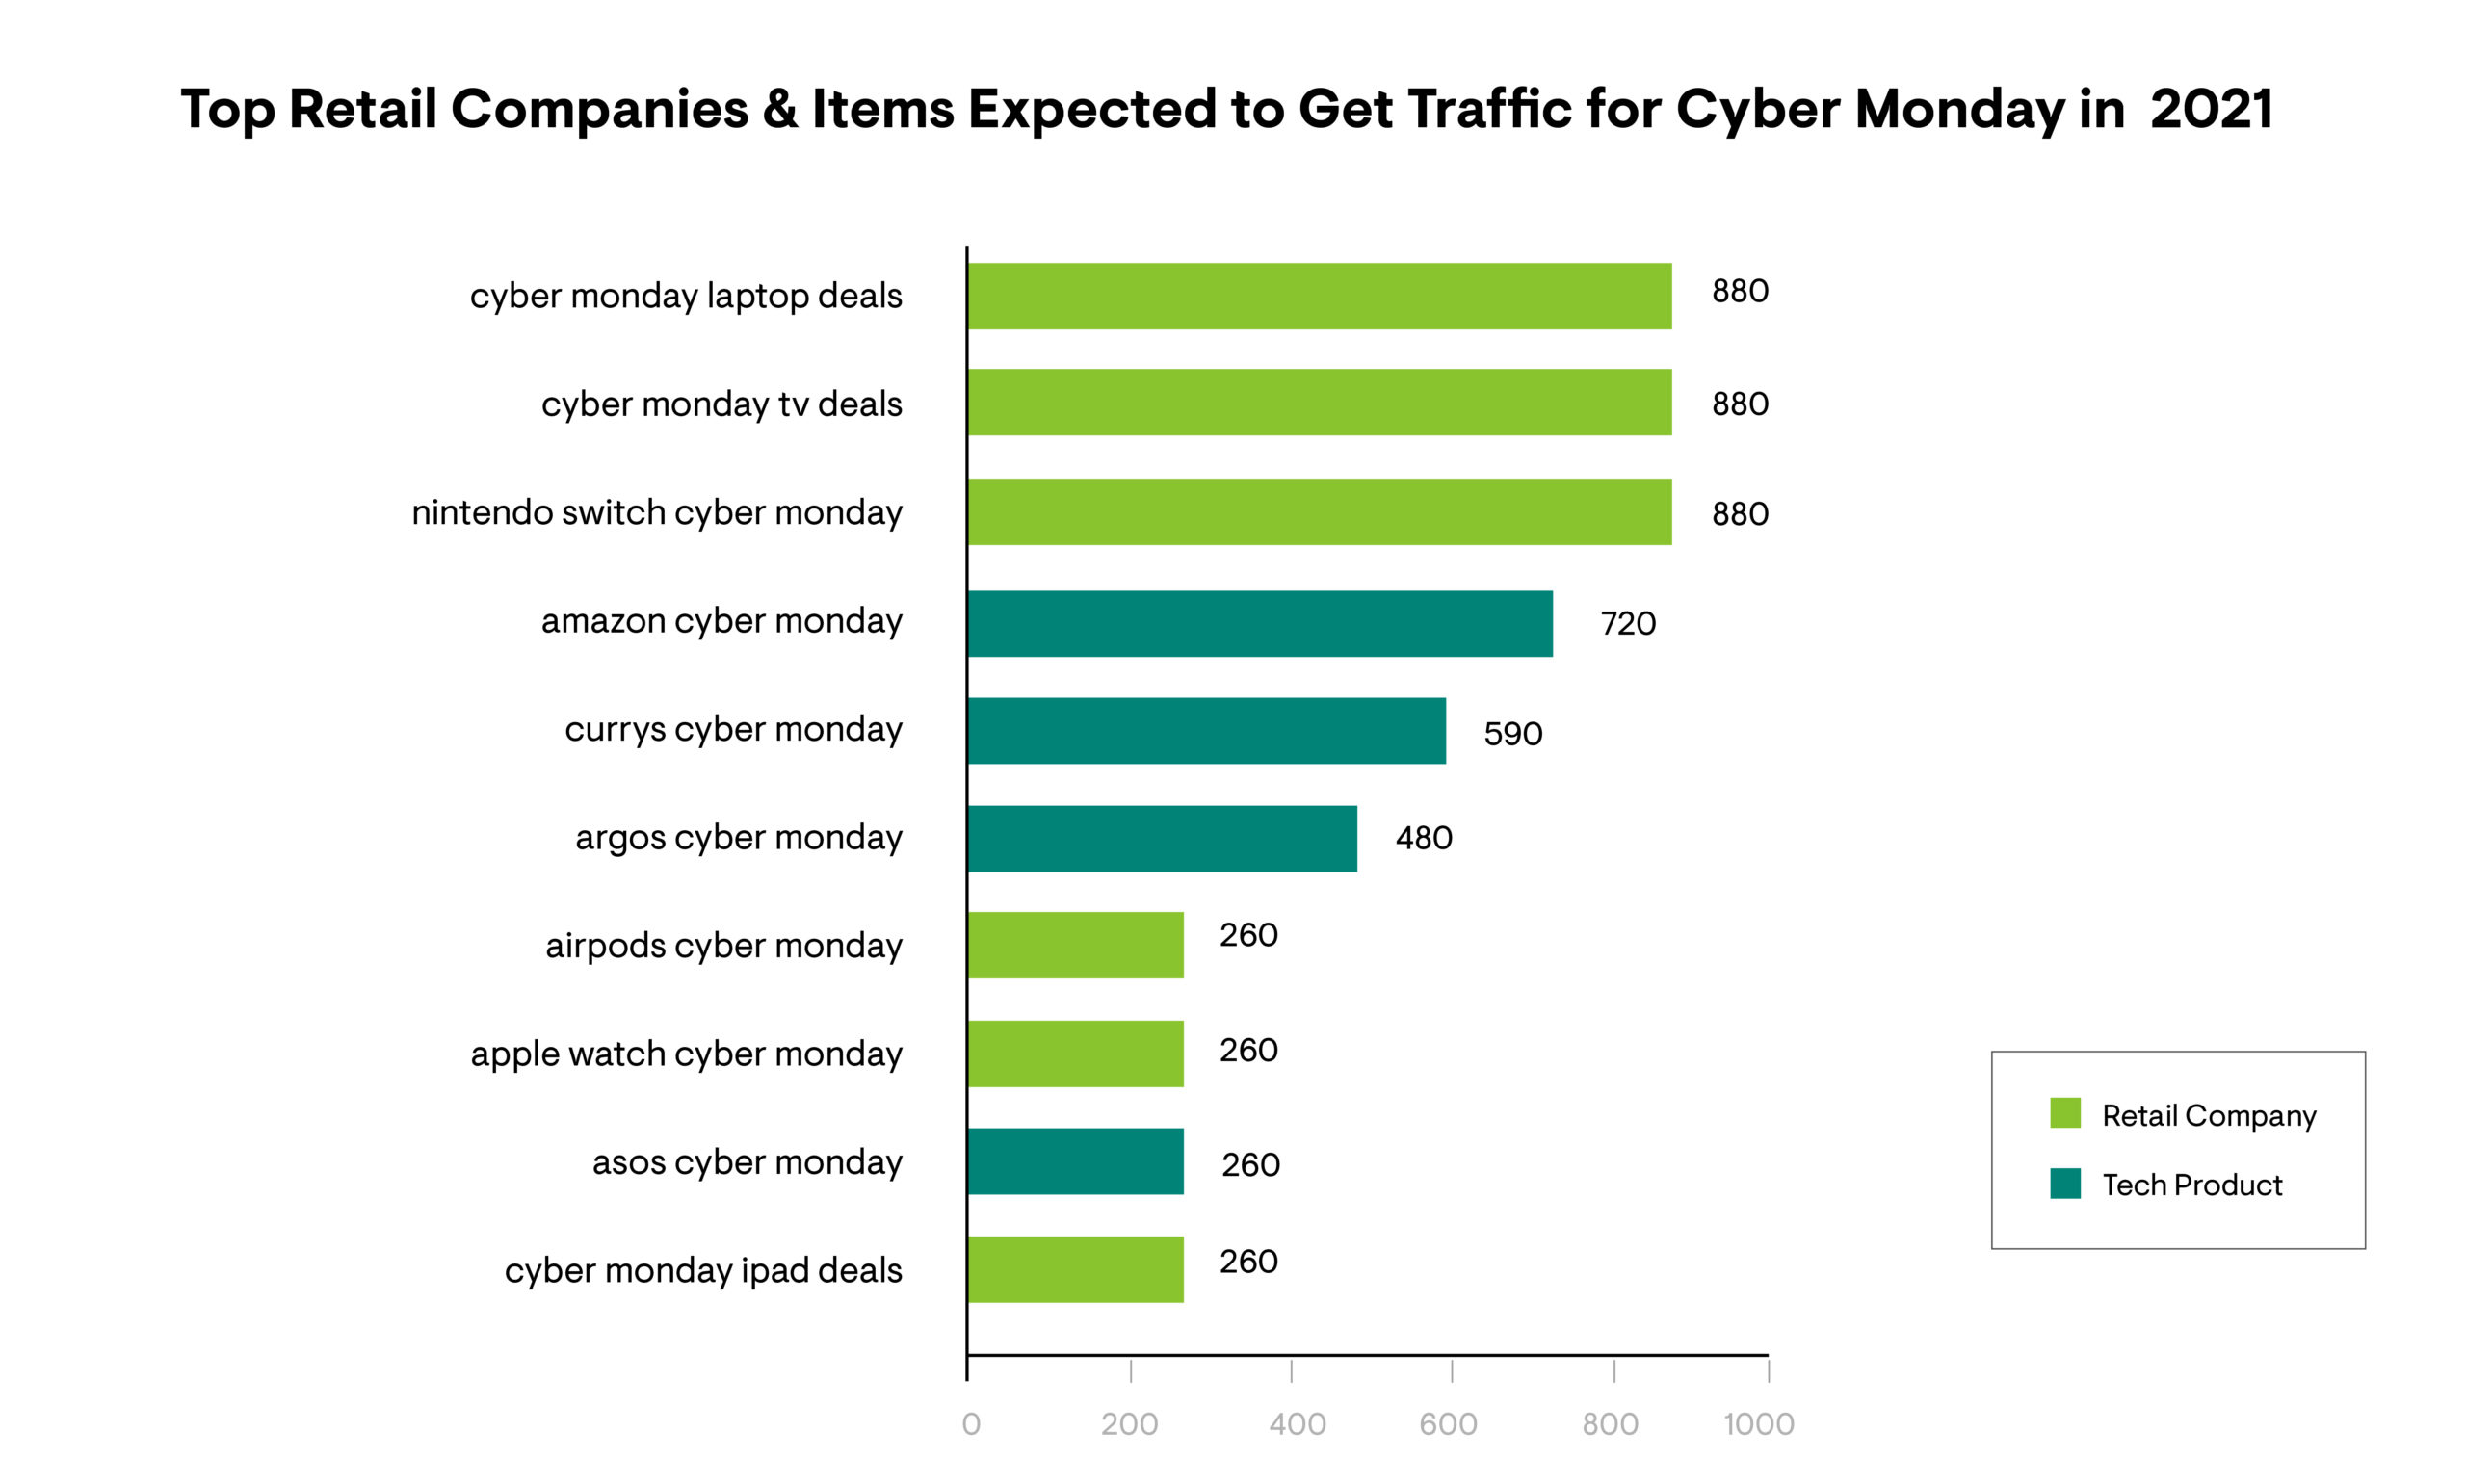 Top Retail Companies & Items Expected to Get Traffic for Cyber Monday in 2021